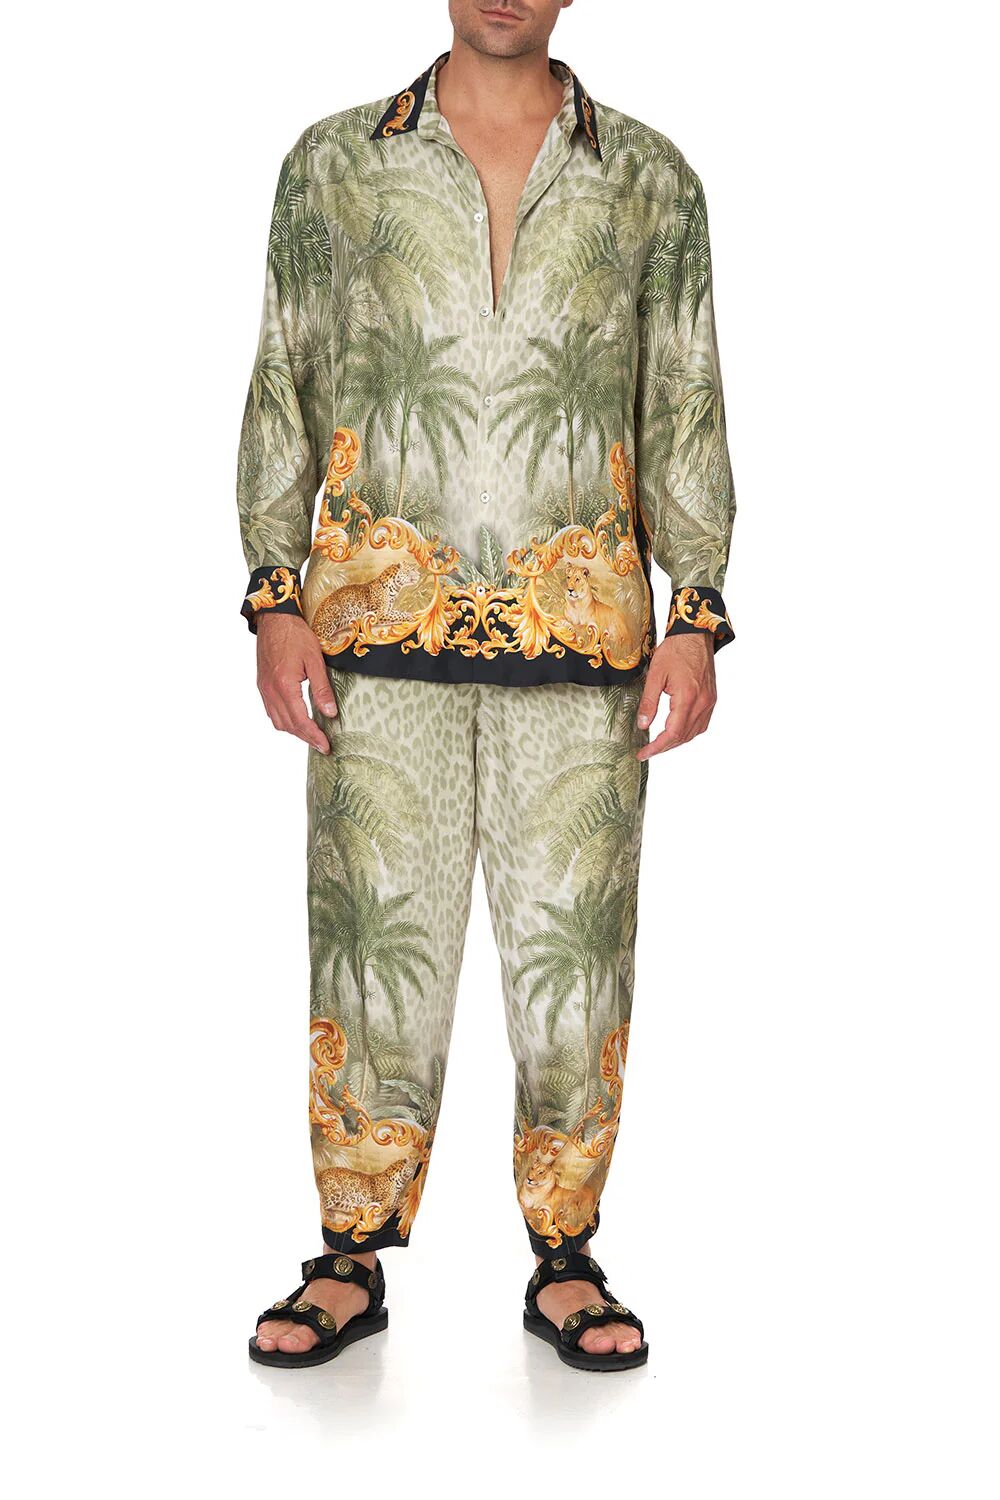 Camilla eBoutique Mens Oversized Shirt Palazzo of Palms, S  - Size: S